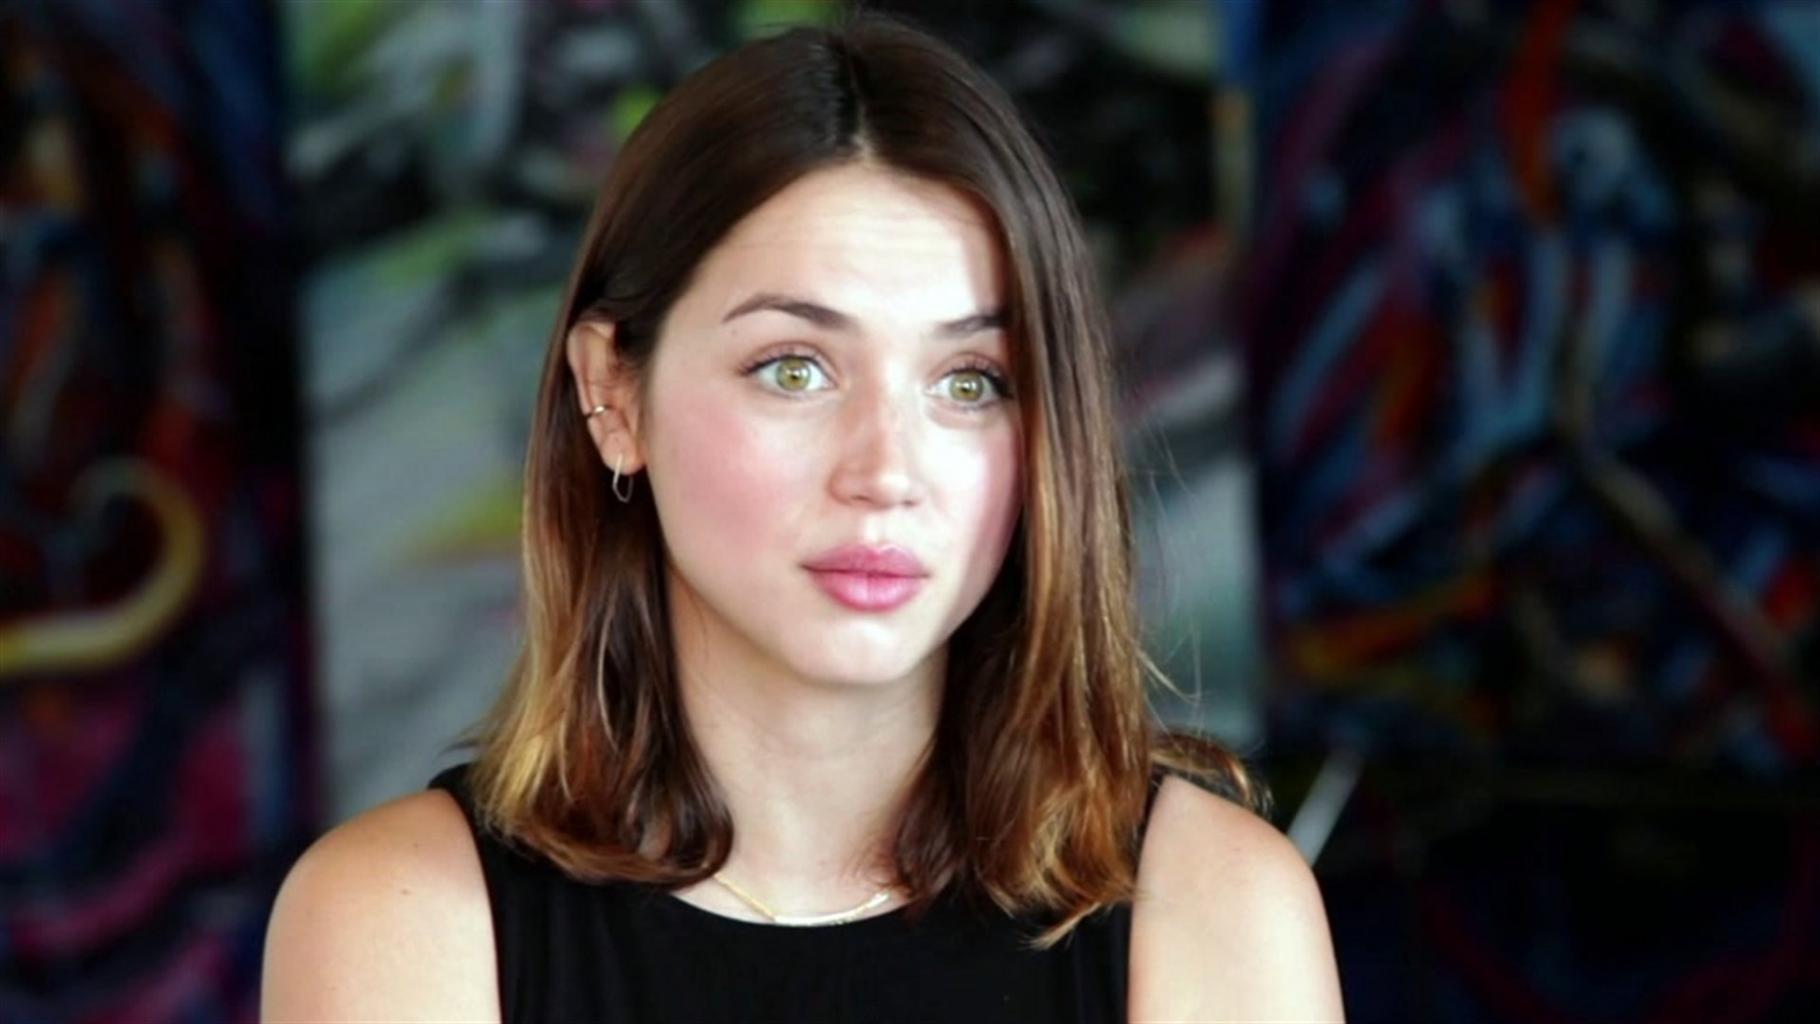 Ana De Armas HD Wallpapers Free Download In High Quality And Resolution